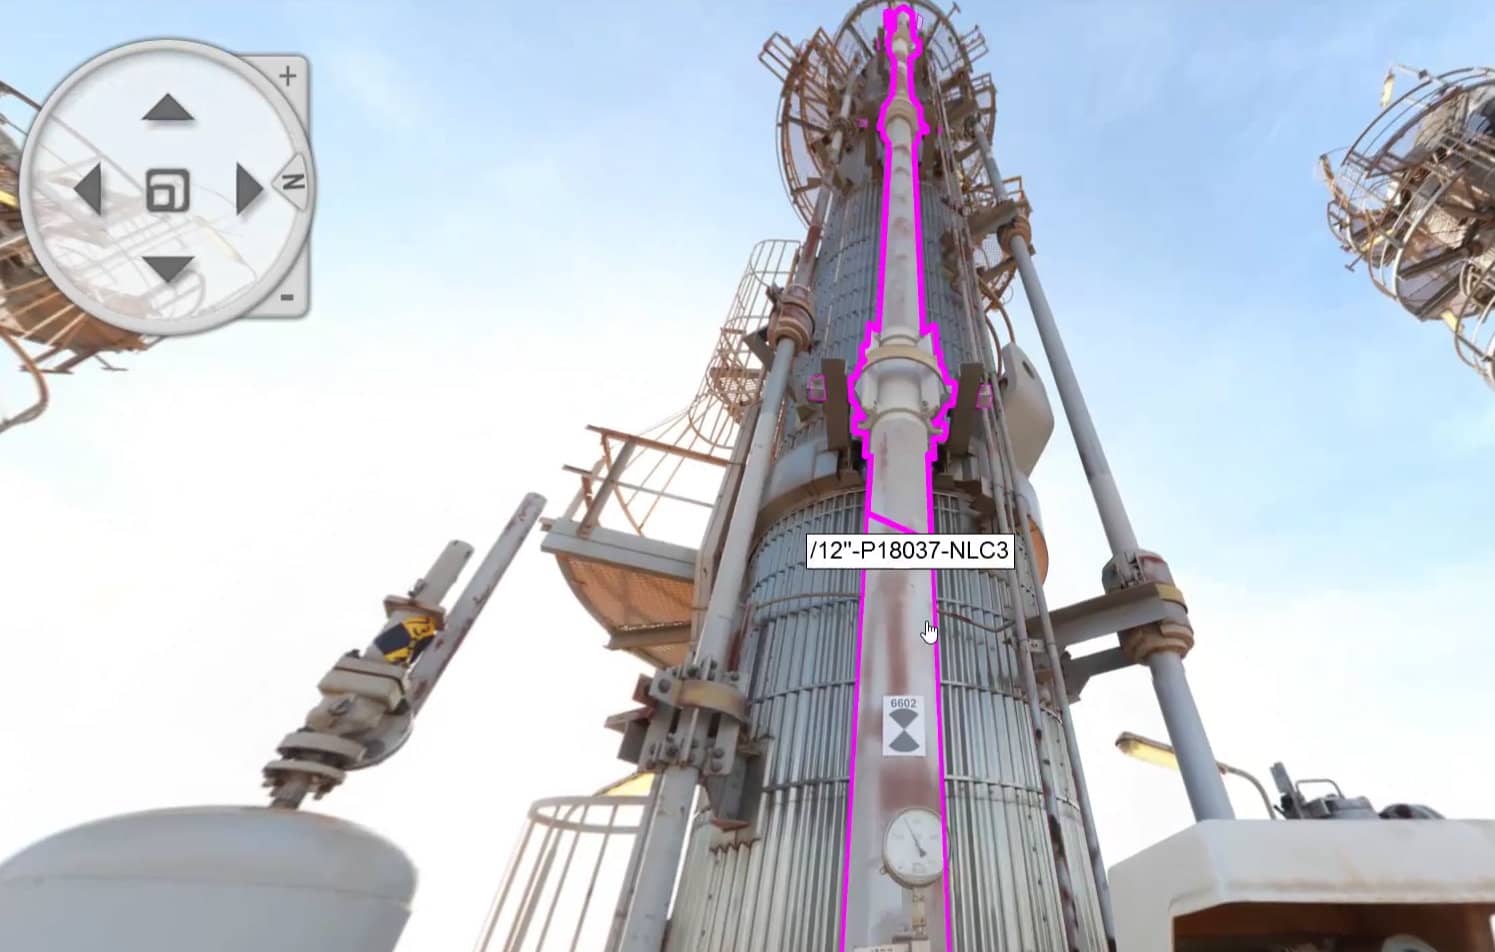 Smartpanoramic view with highlighted pipe